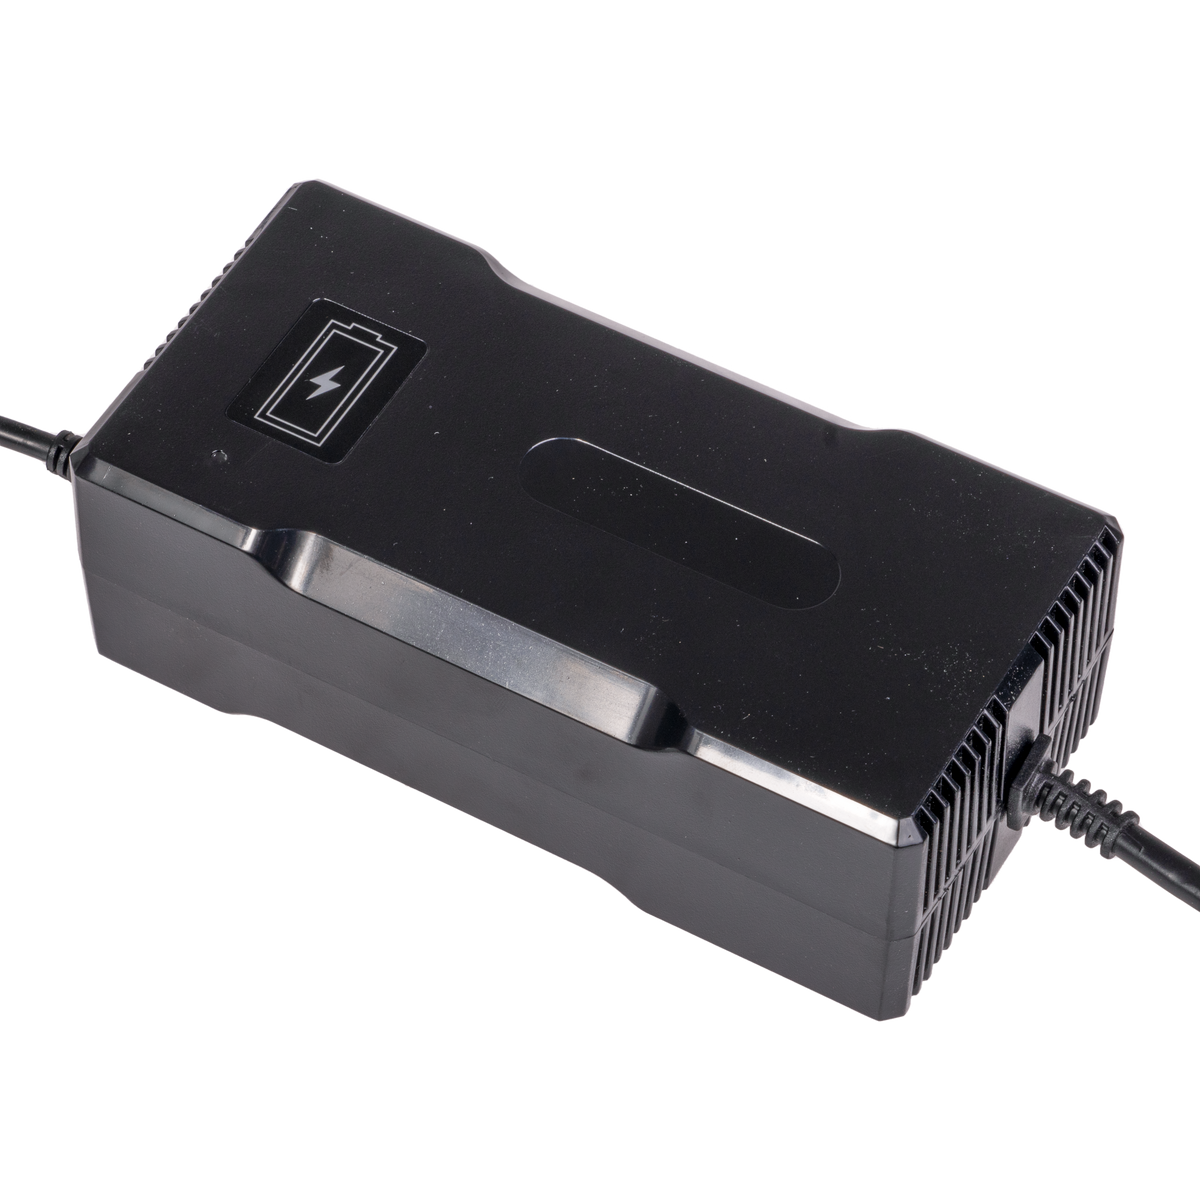 58.8V Portable Battery Charger for Sale